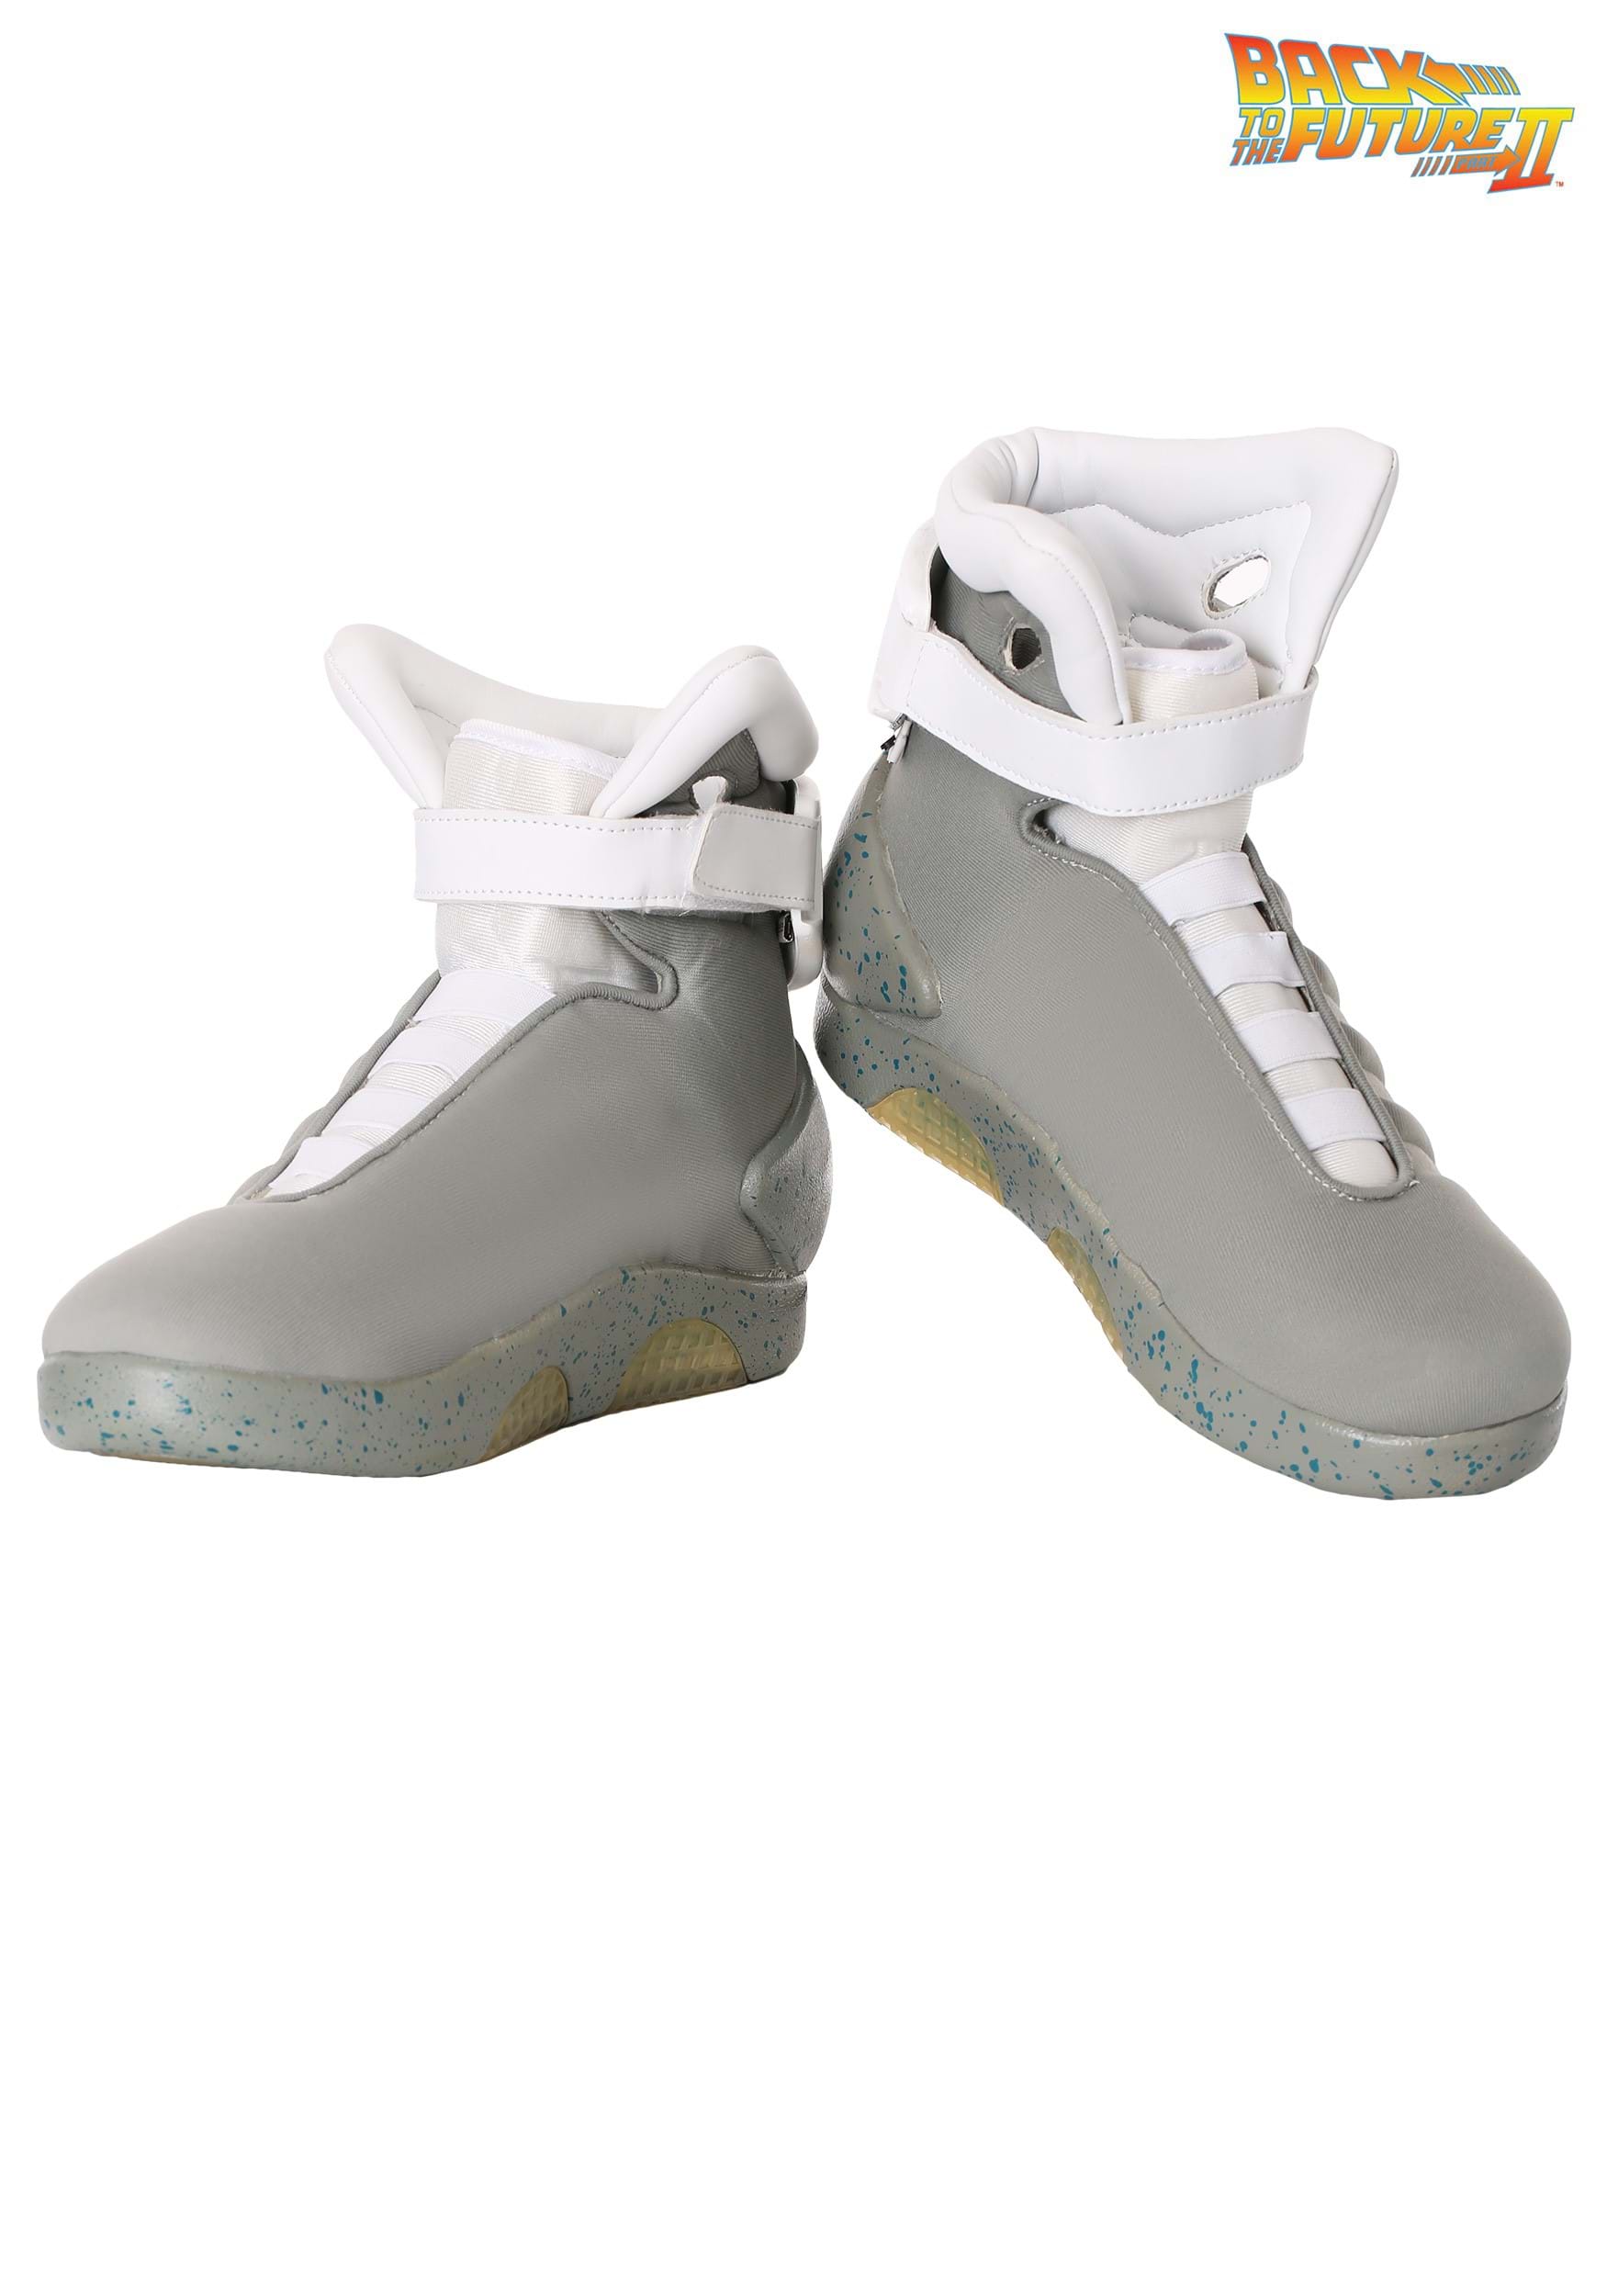 Back To The Future Part II Light Up Shoes